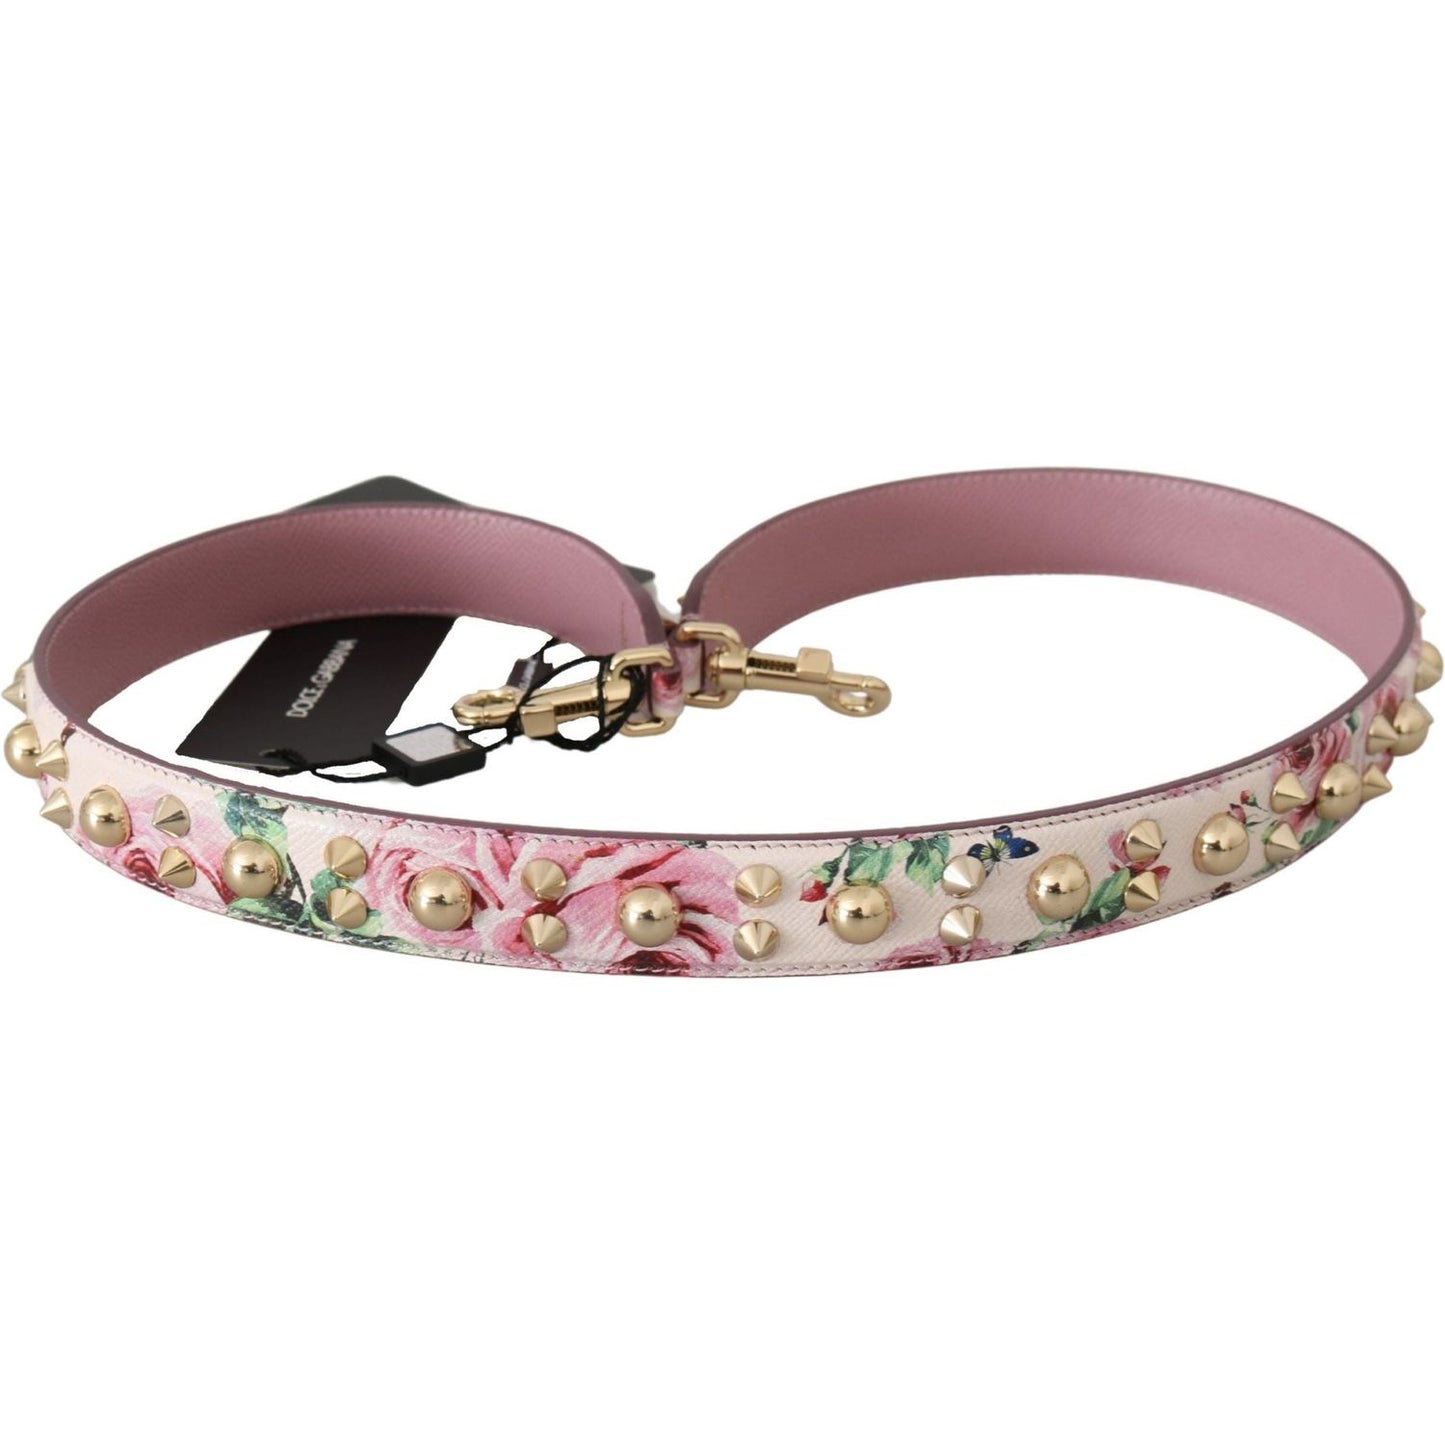 Dolce & Gabbana Chic Floral Pink Leather Shoulder Strap pink-floral-leather-stud-accessory-shoulder-strap-1 IMG_1666-scaled-bc5c21d7-8cb.jpg